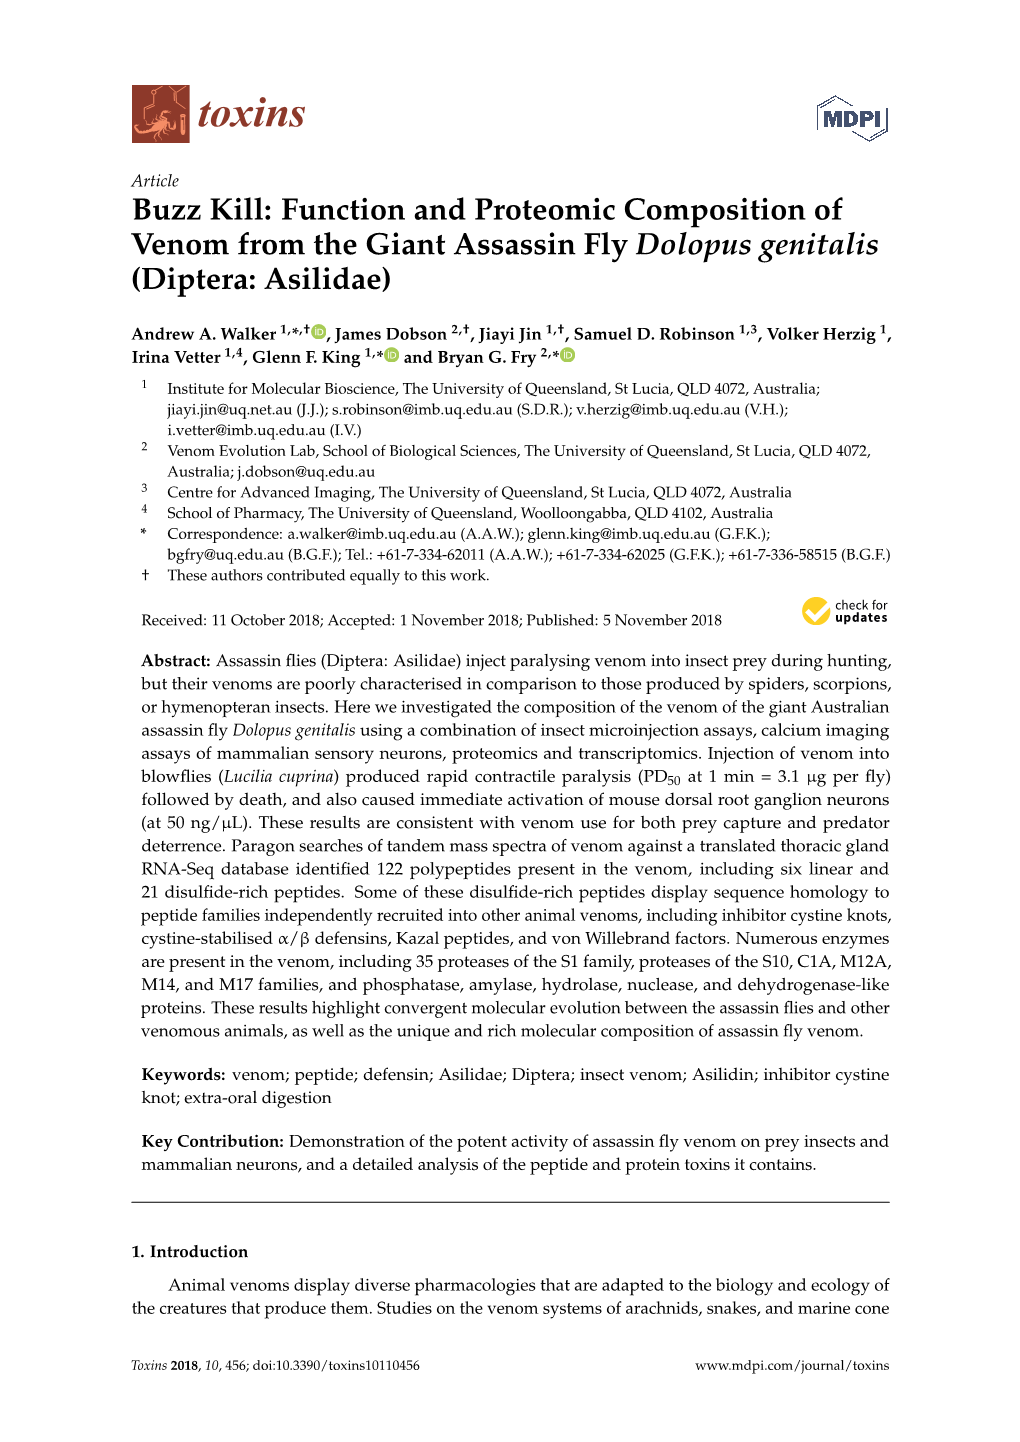 Buzz Kill: Function and Proteomic Composition of Venom from the Giant Assassin Fly Dolopus Genitalis (Diptera: Asilidae)